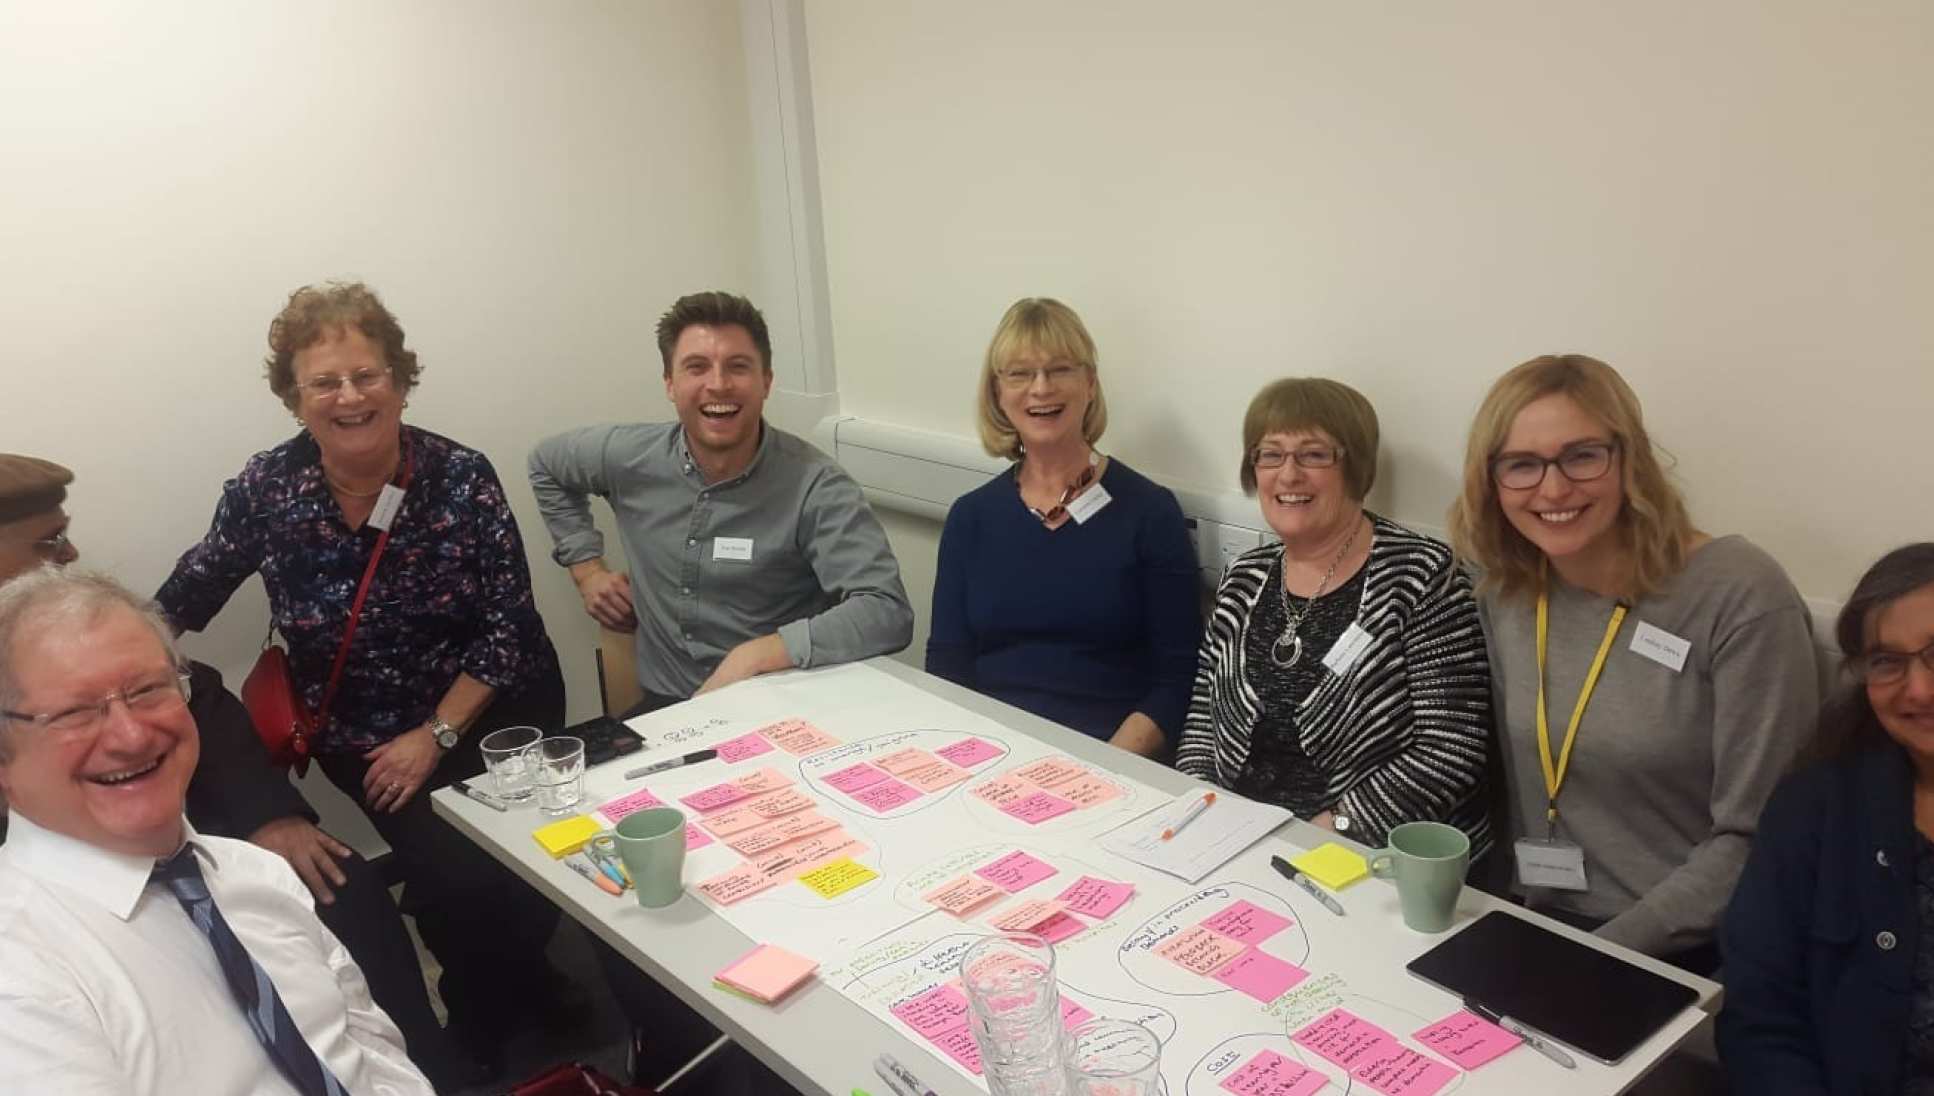 A photograph of members of the workshop sitting around a table with post it notes